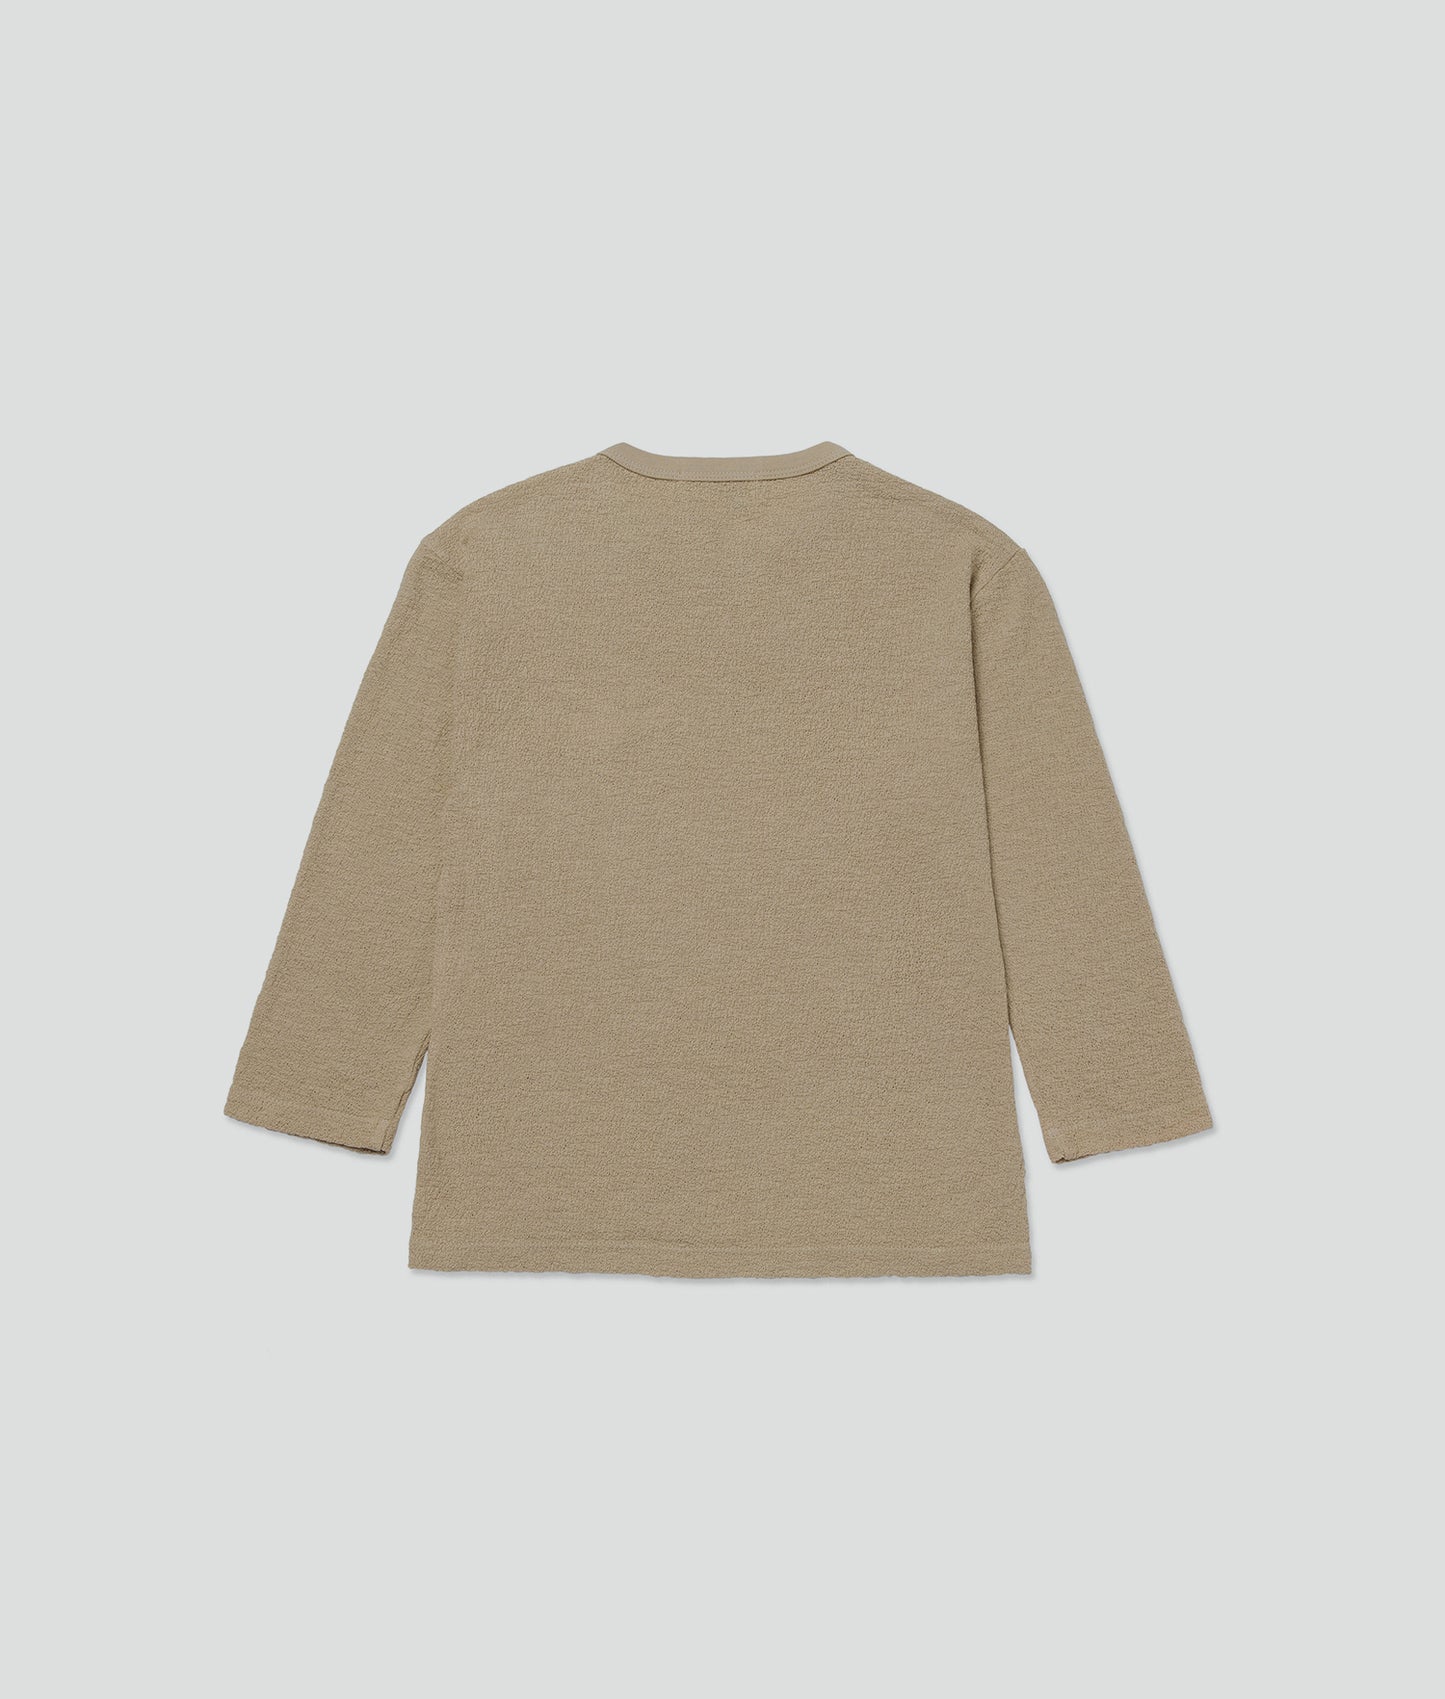 Sand Group Project Long Sleeve Shirt